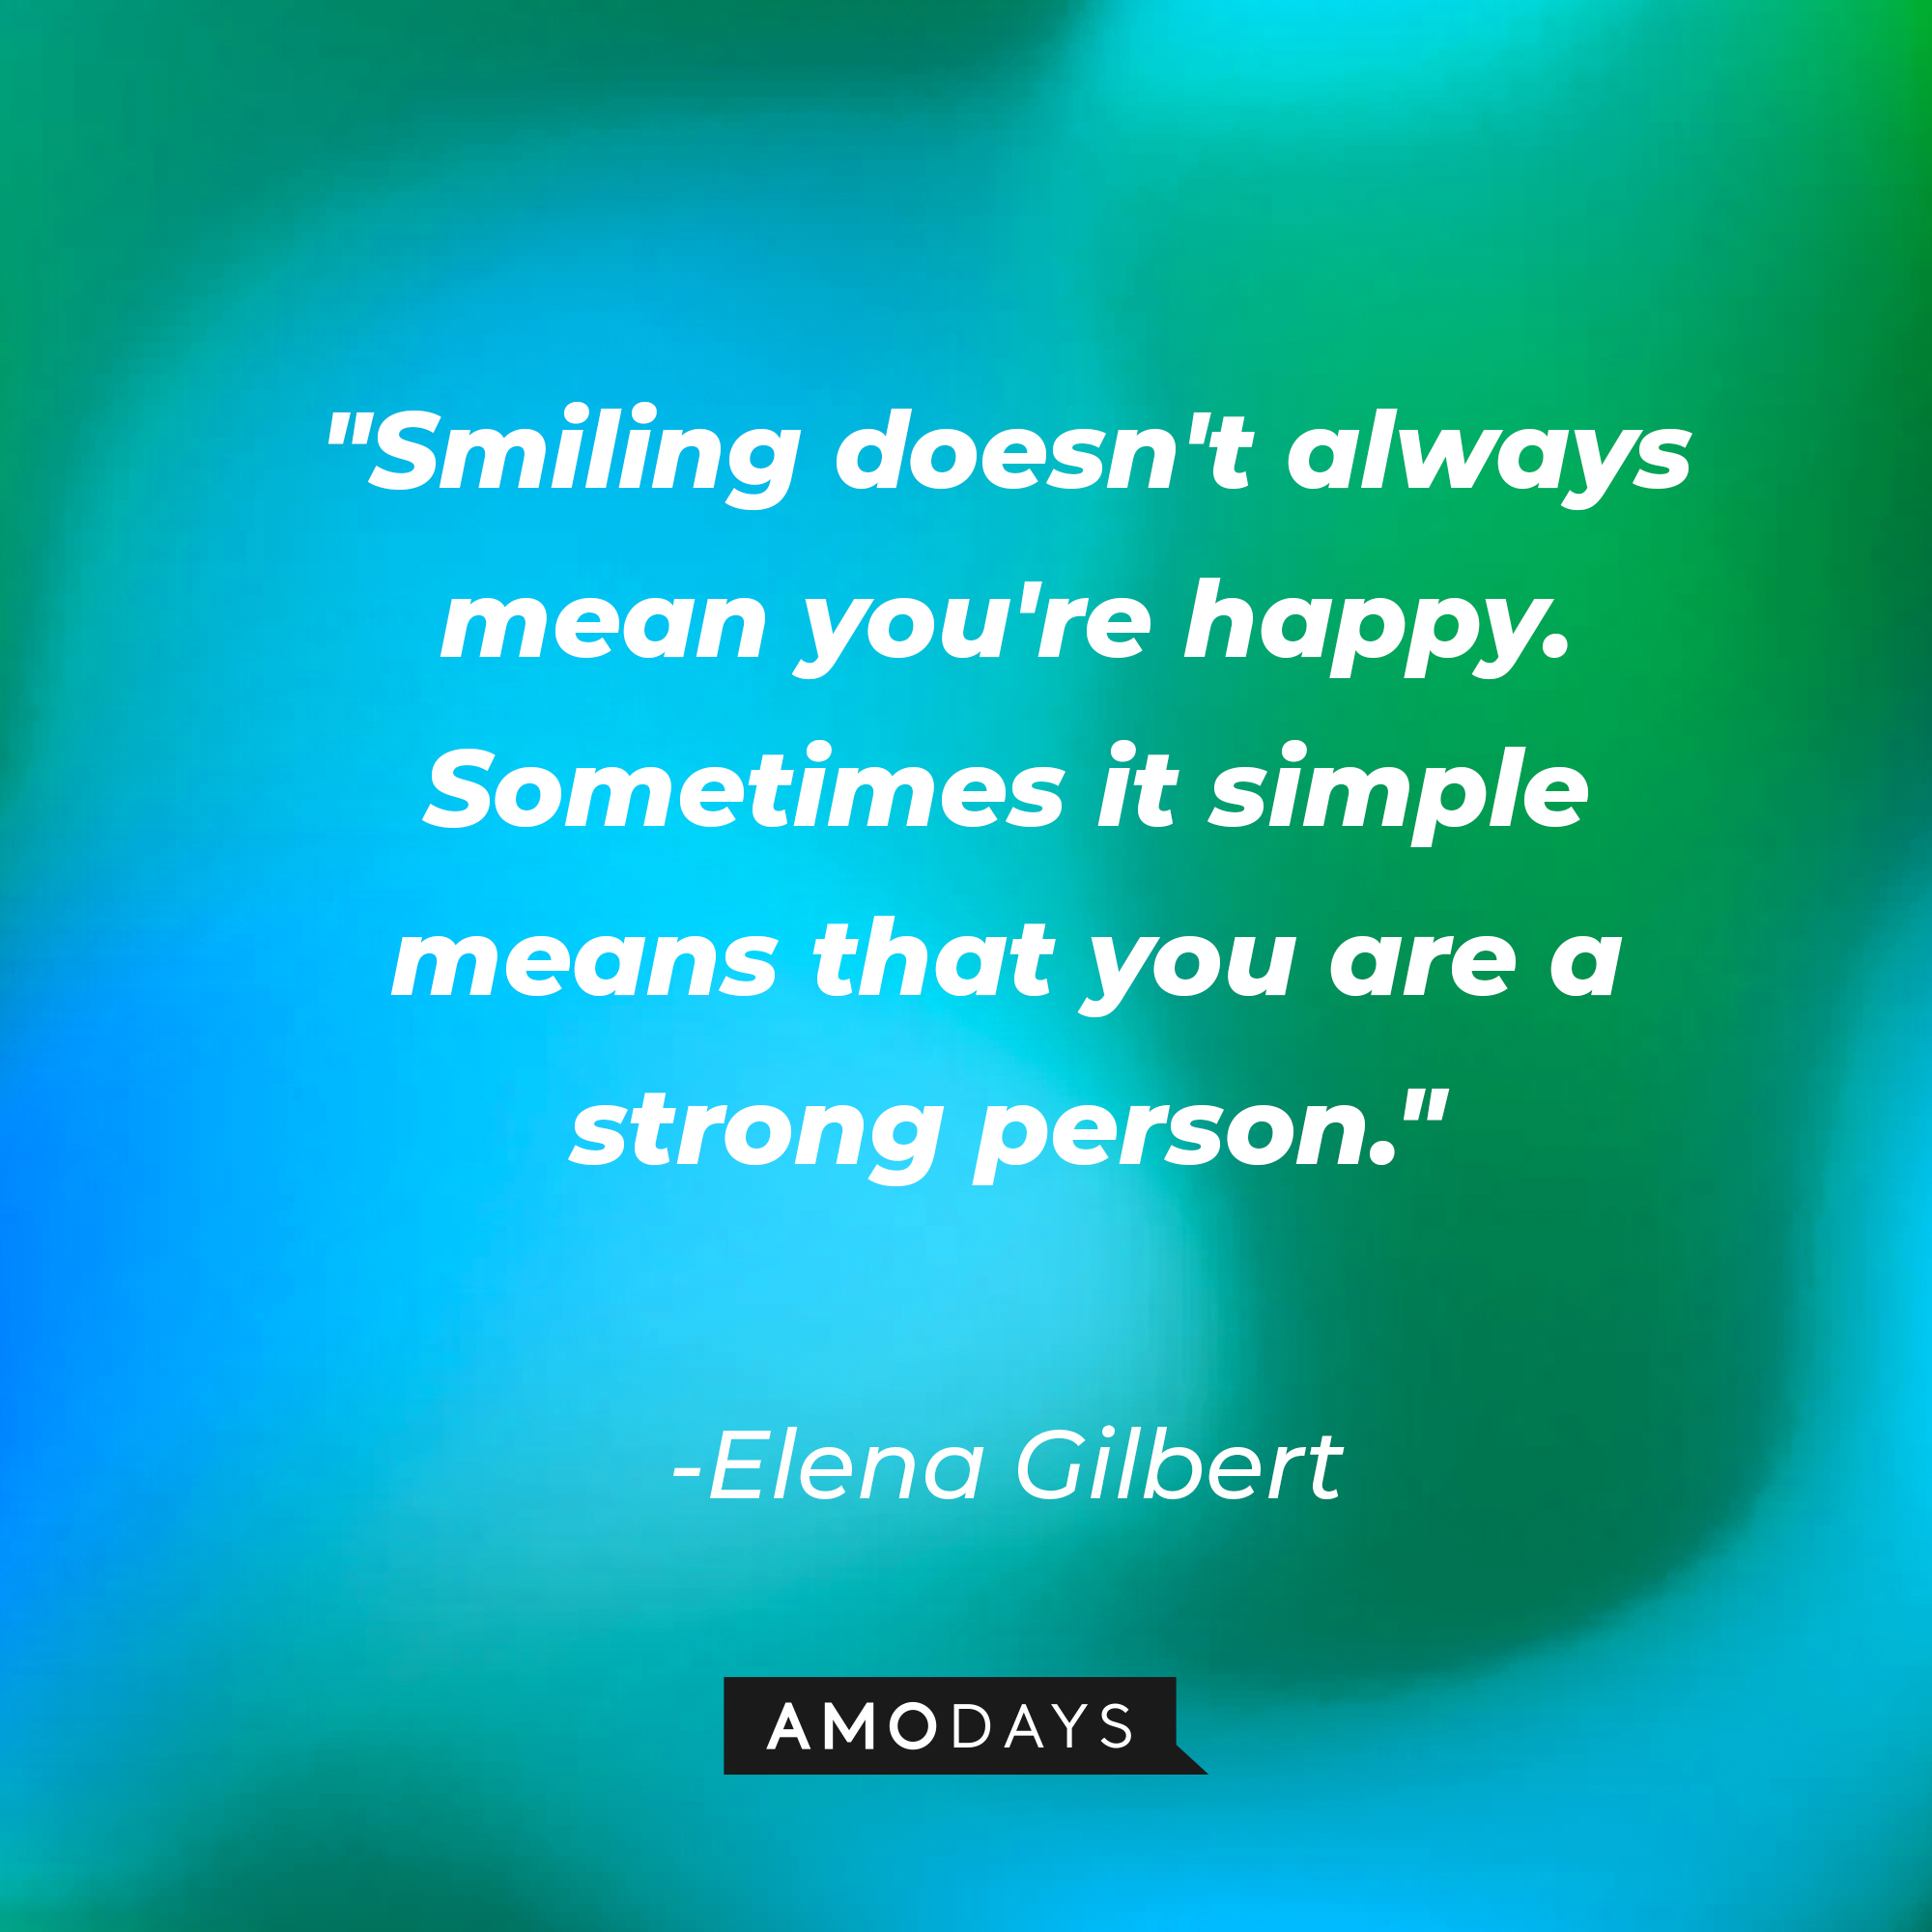 Elena Gilbert's quote: "Smiling doesn't always mean you're happy. Sometimes it simple means that you are a strong person." | Image: AmoDays